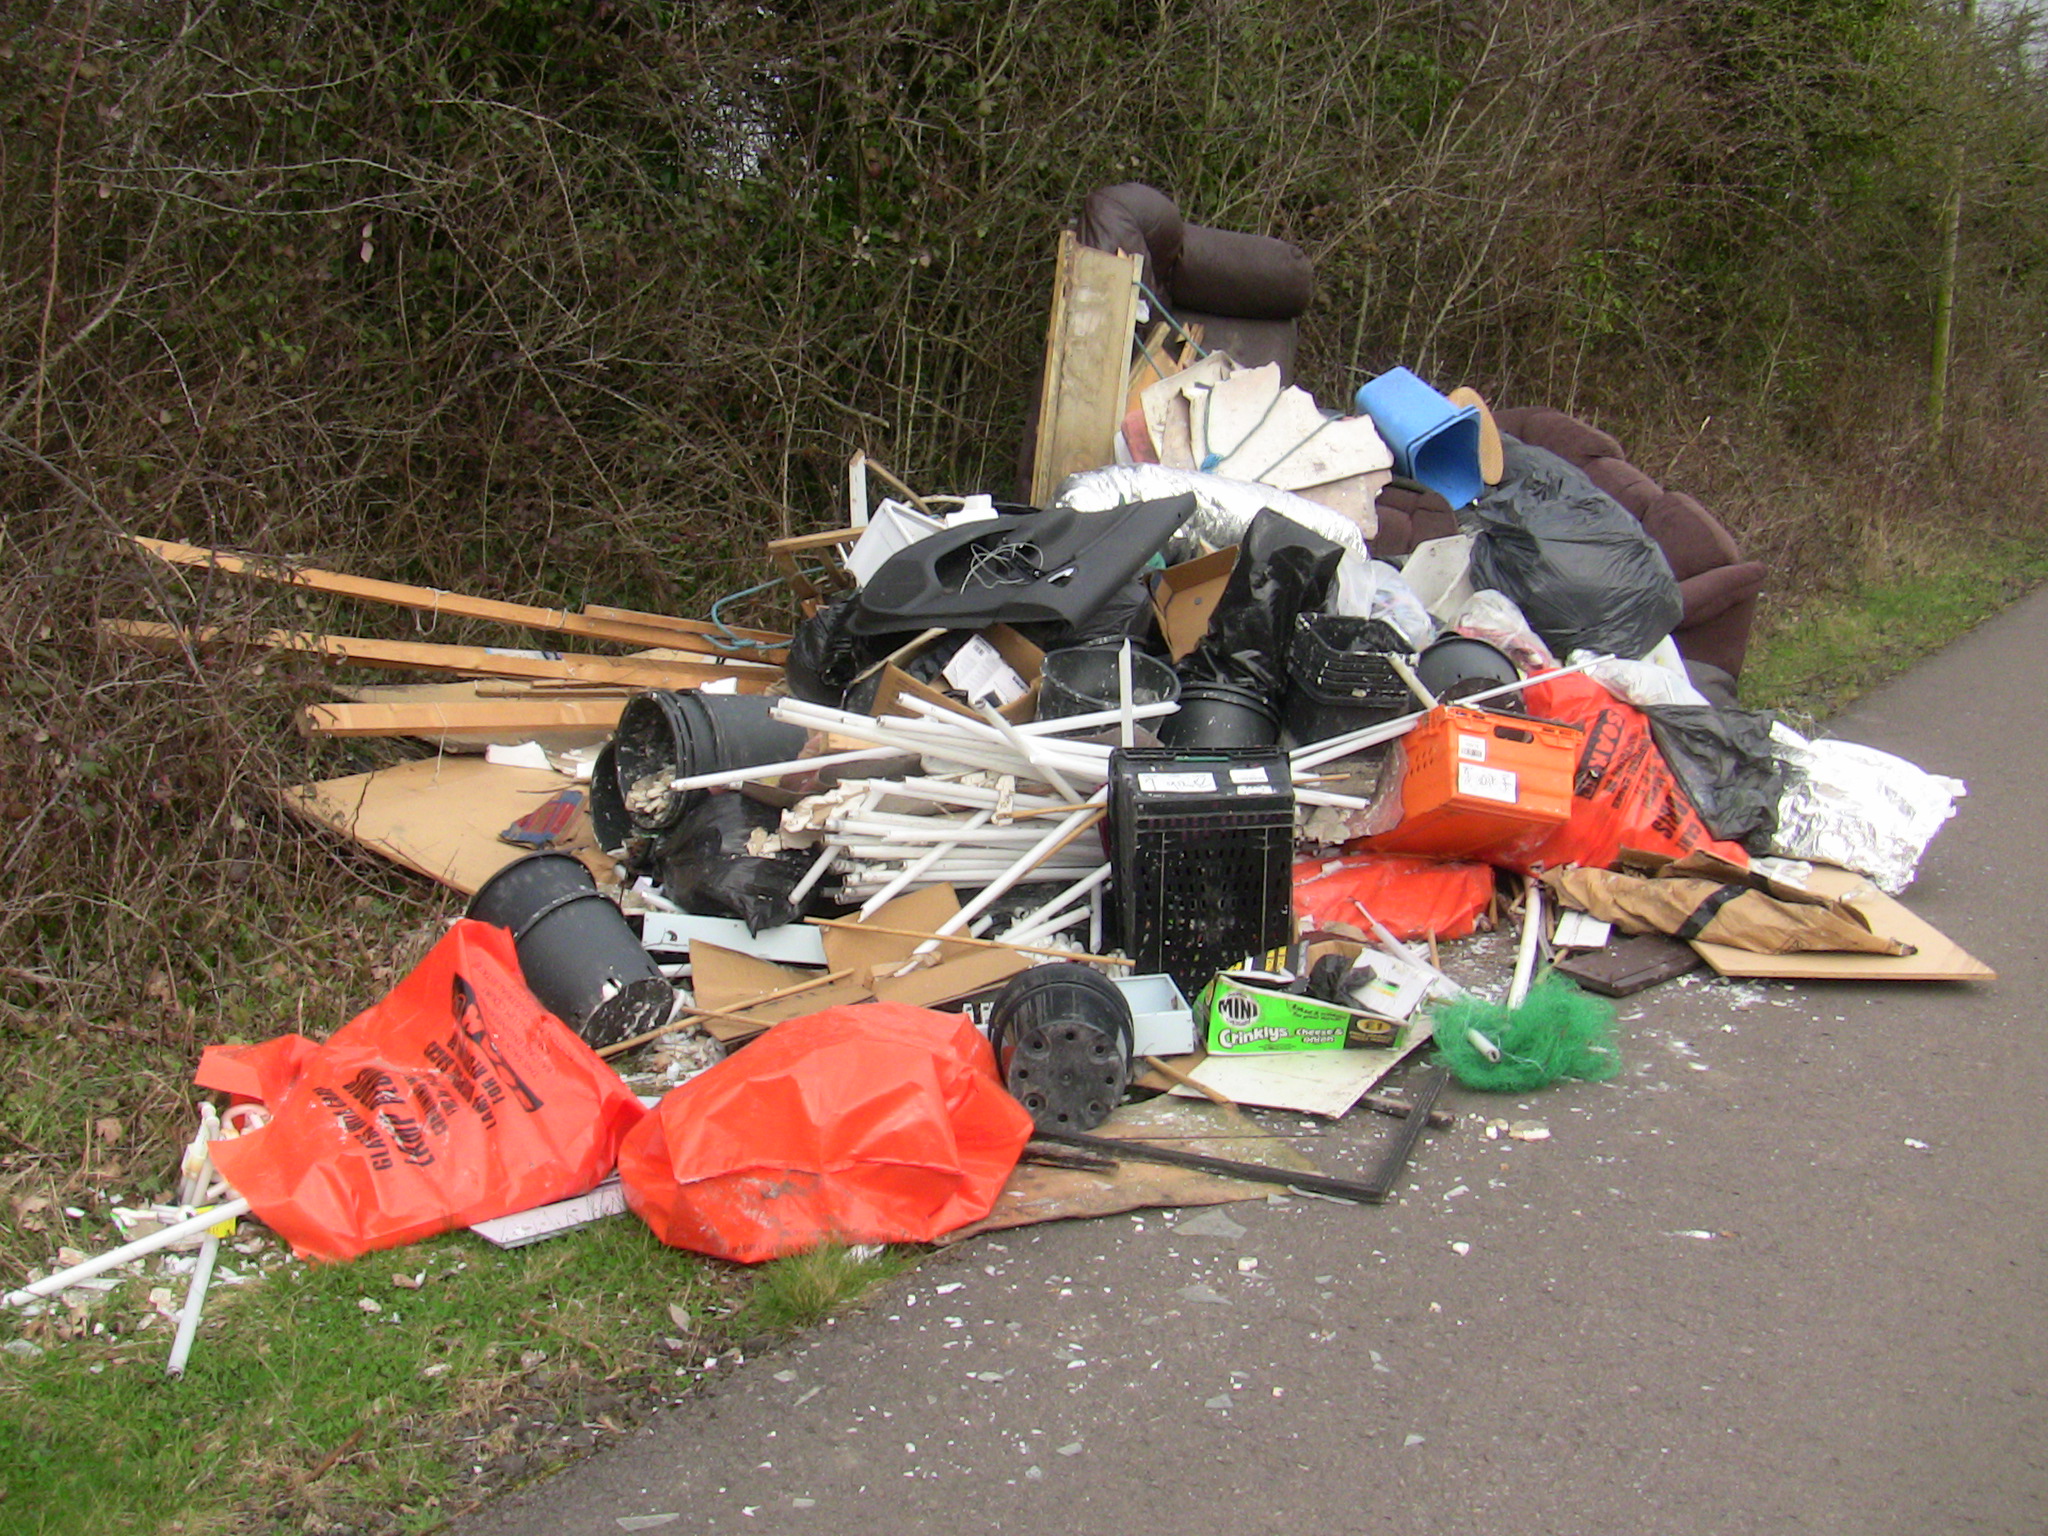 Bristol man receives 68 week sentence after being prosecuted for fly tipping  in South Gloucestershire